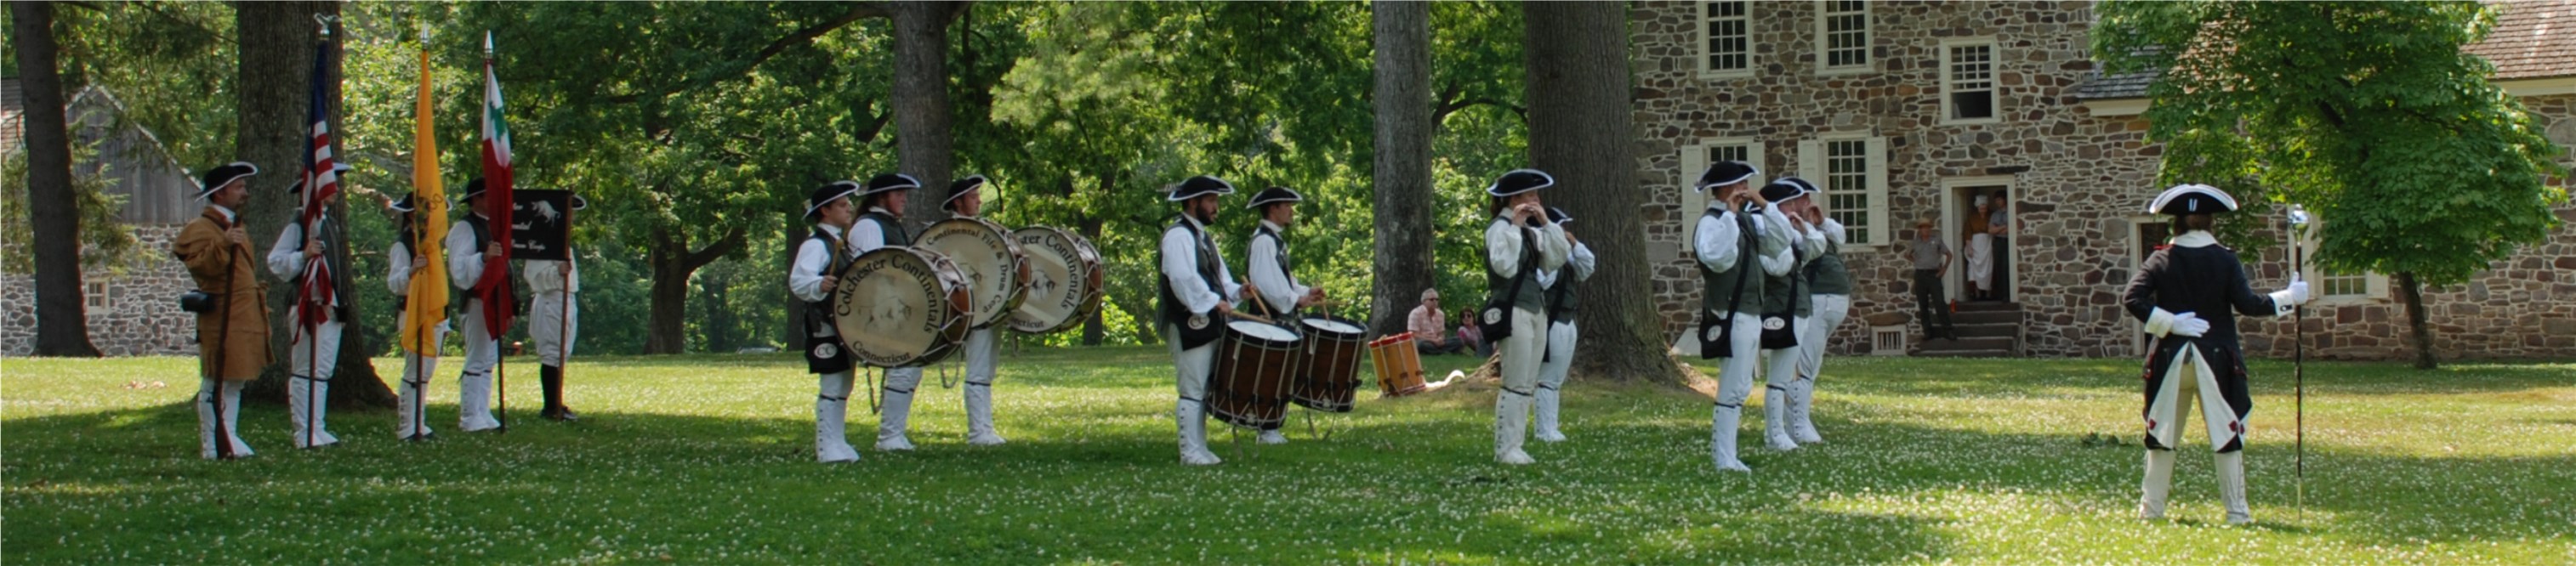 CCFDC Fife and Drum Corps